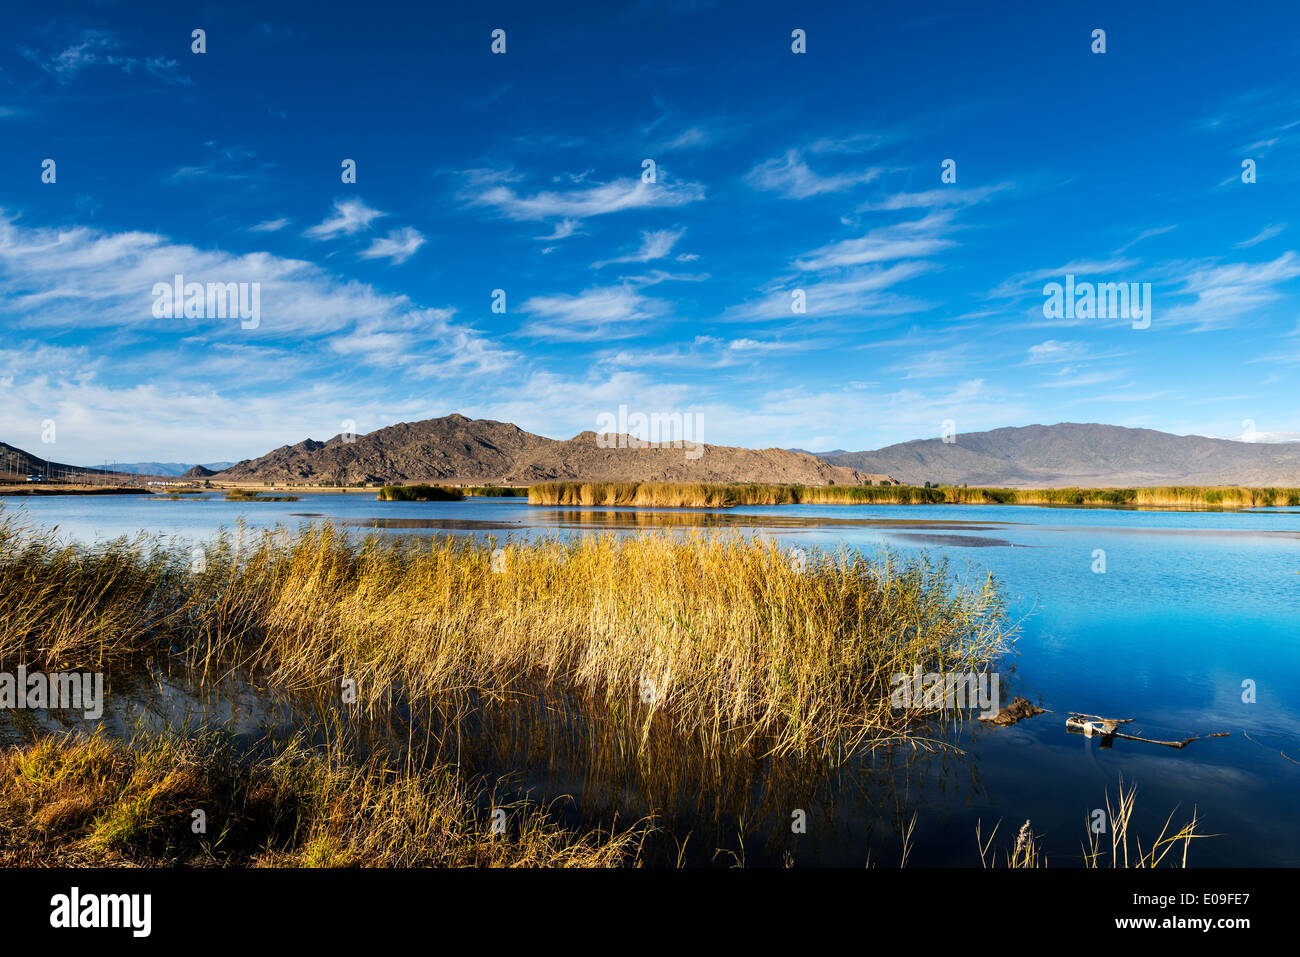 Reeds and lake in the autumn Stock Photo